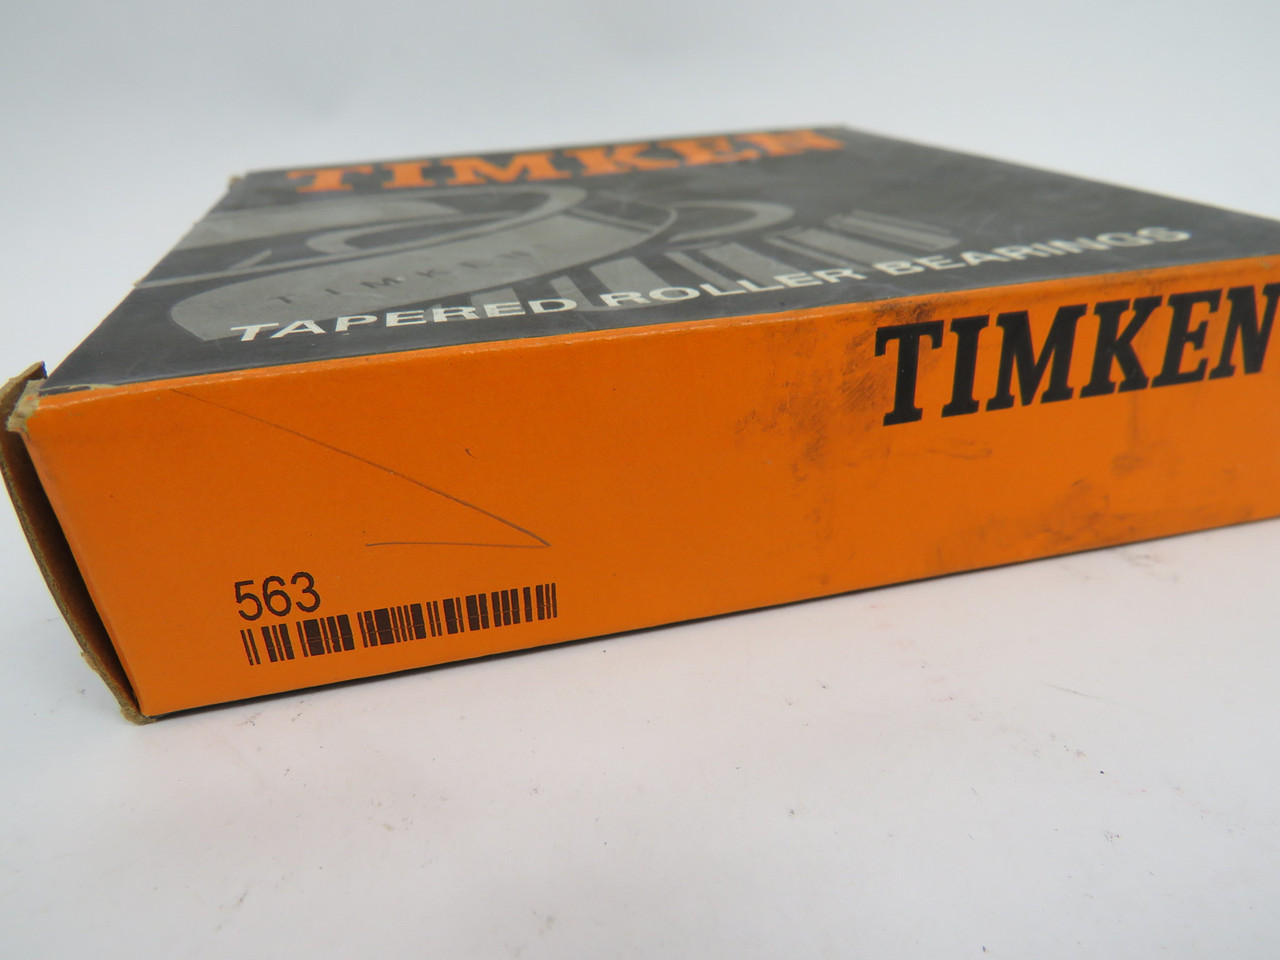 Timken 563 Tapered Roller Bearing Cup 5"OD 1.125"W NEW